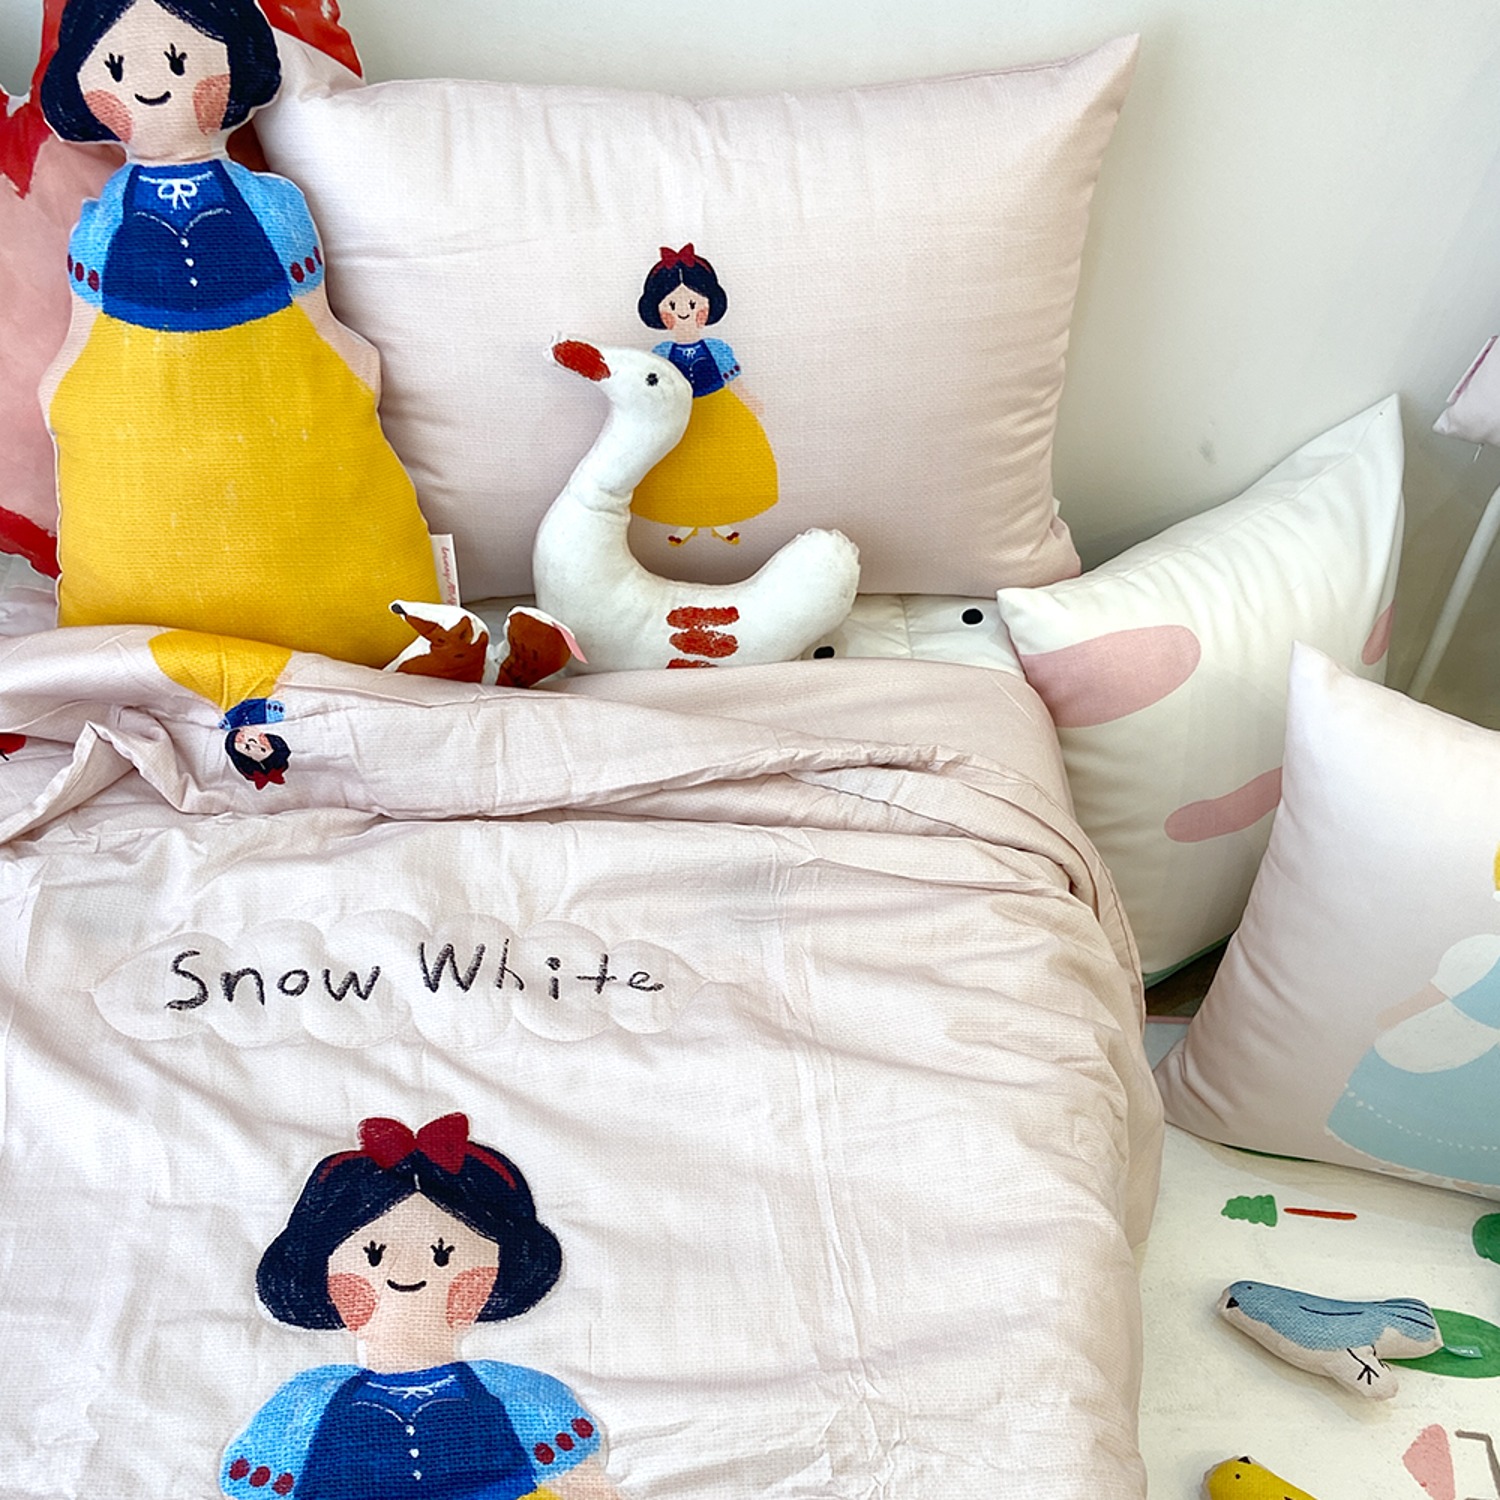 [drawing AMY] Snow white summer bed comforter set